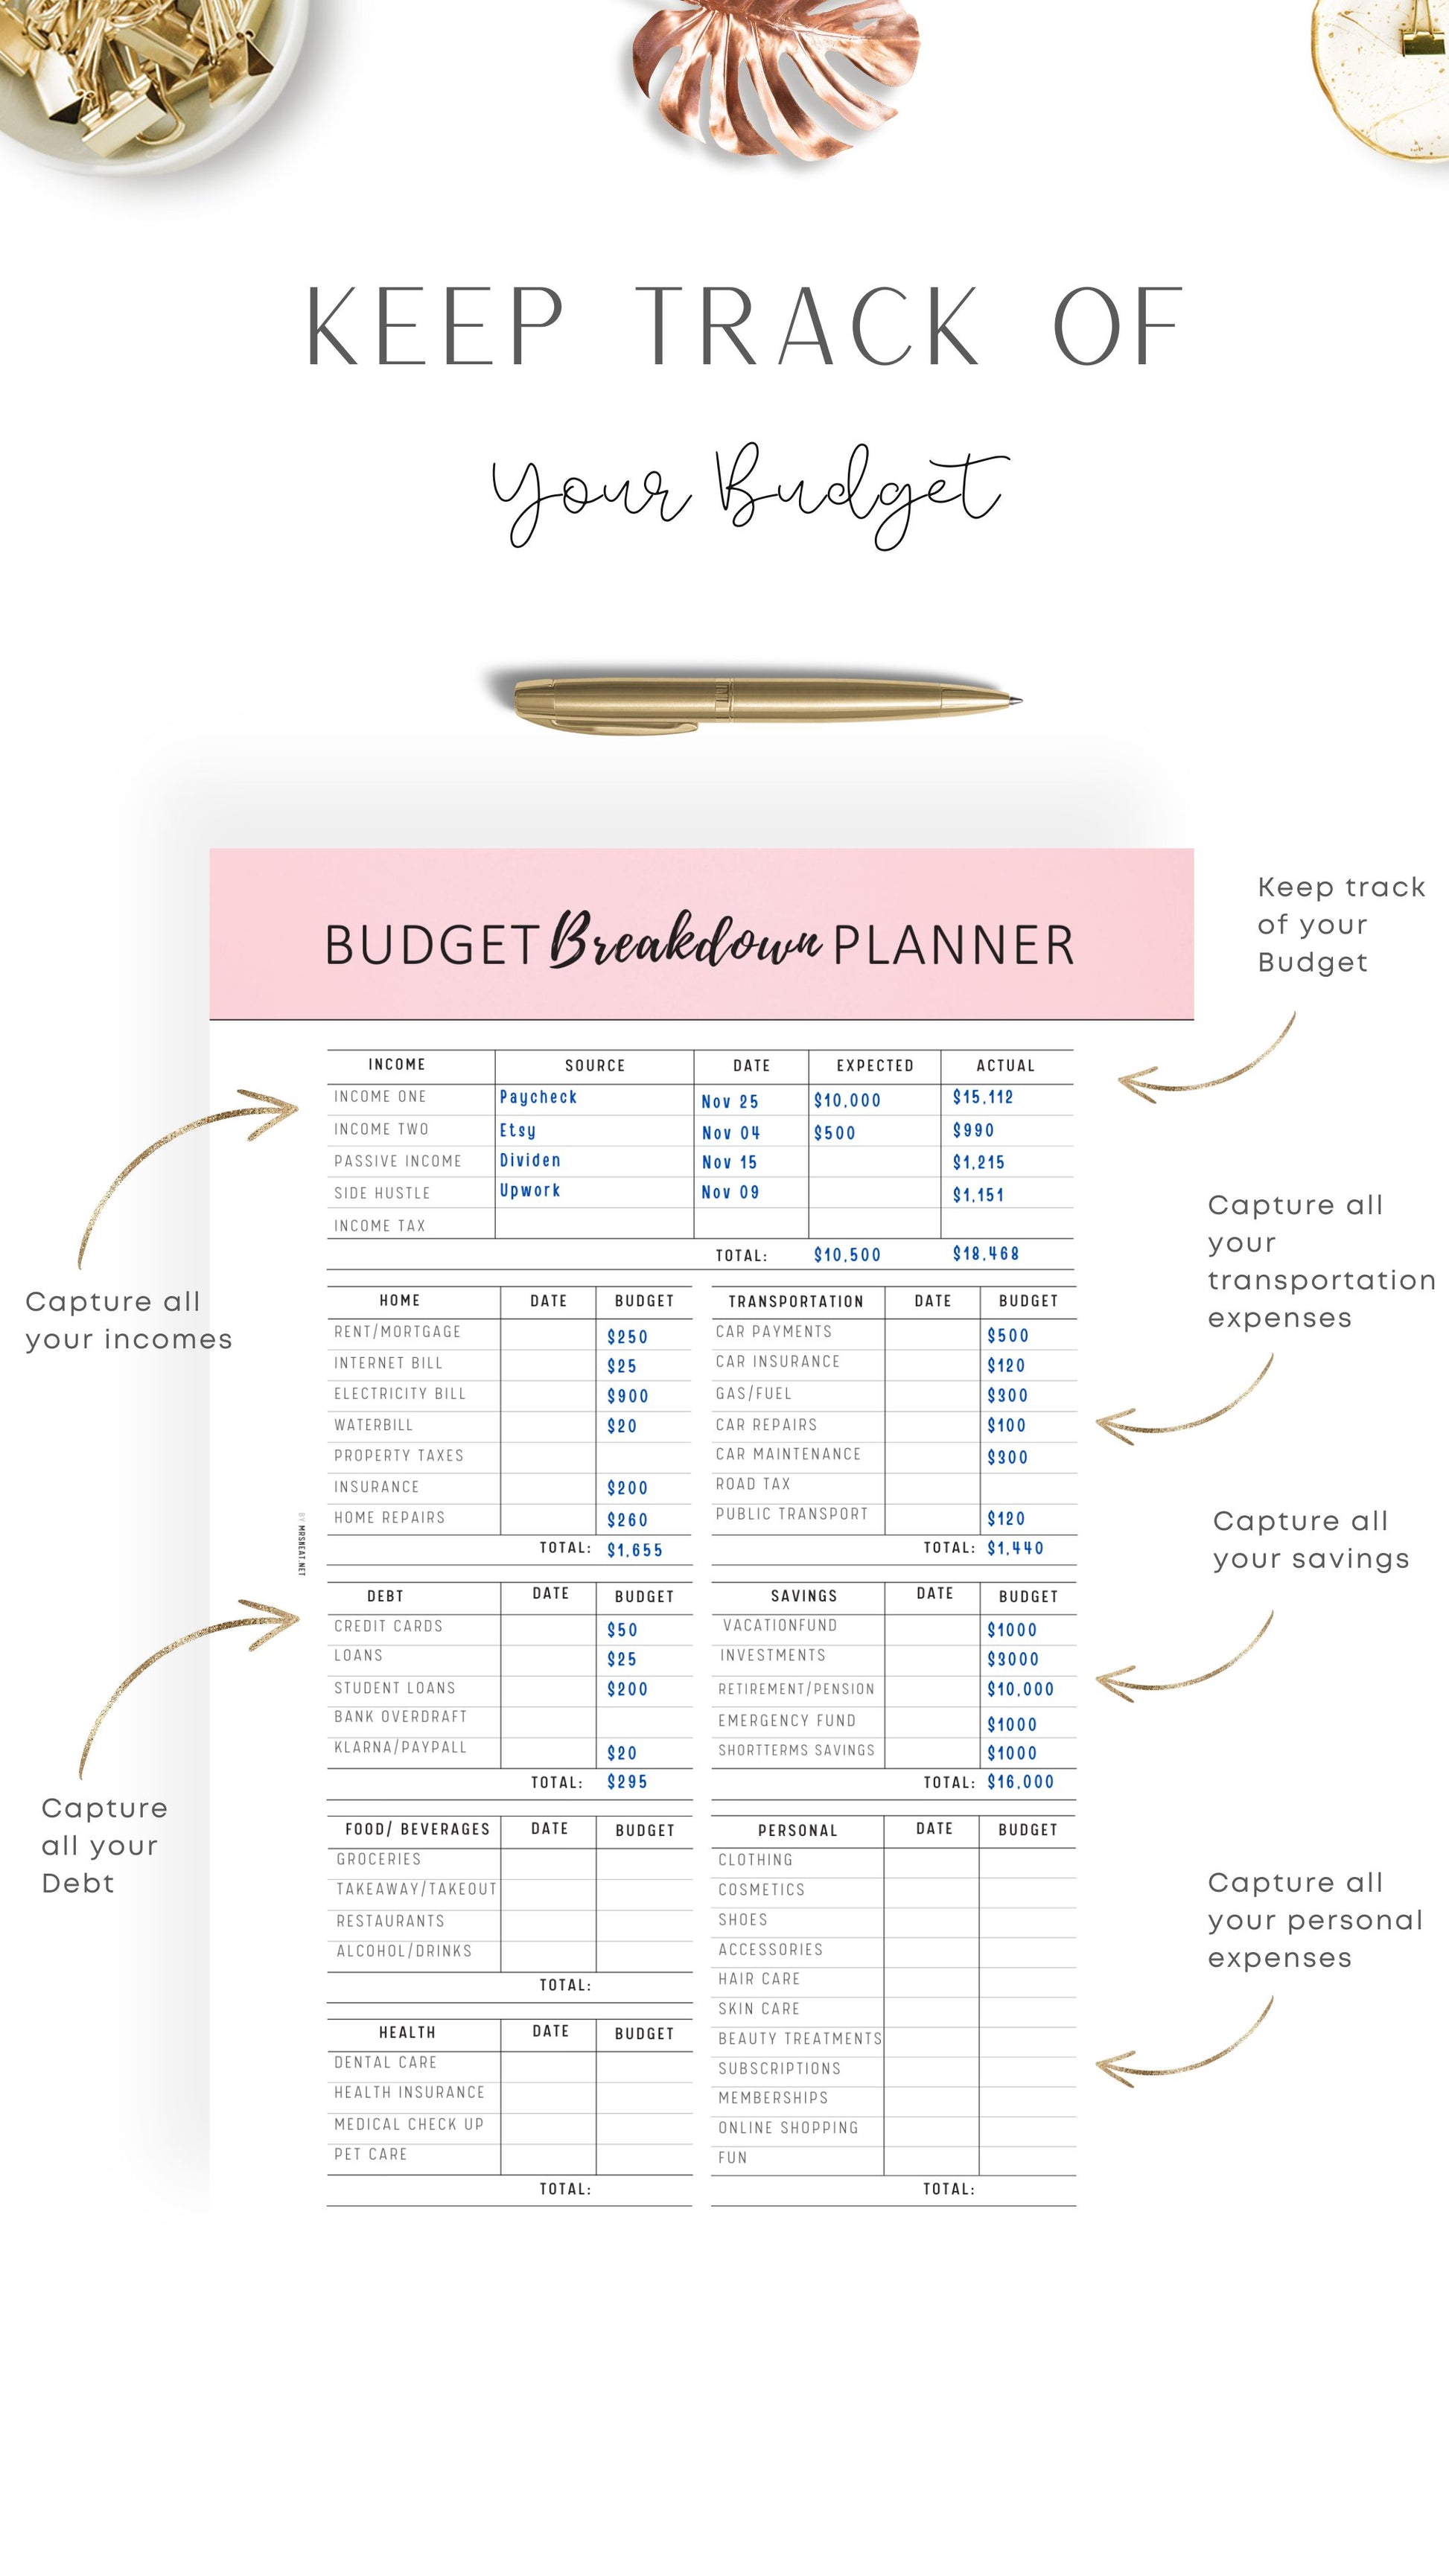 How to use Budget Breakdown Planner Template